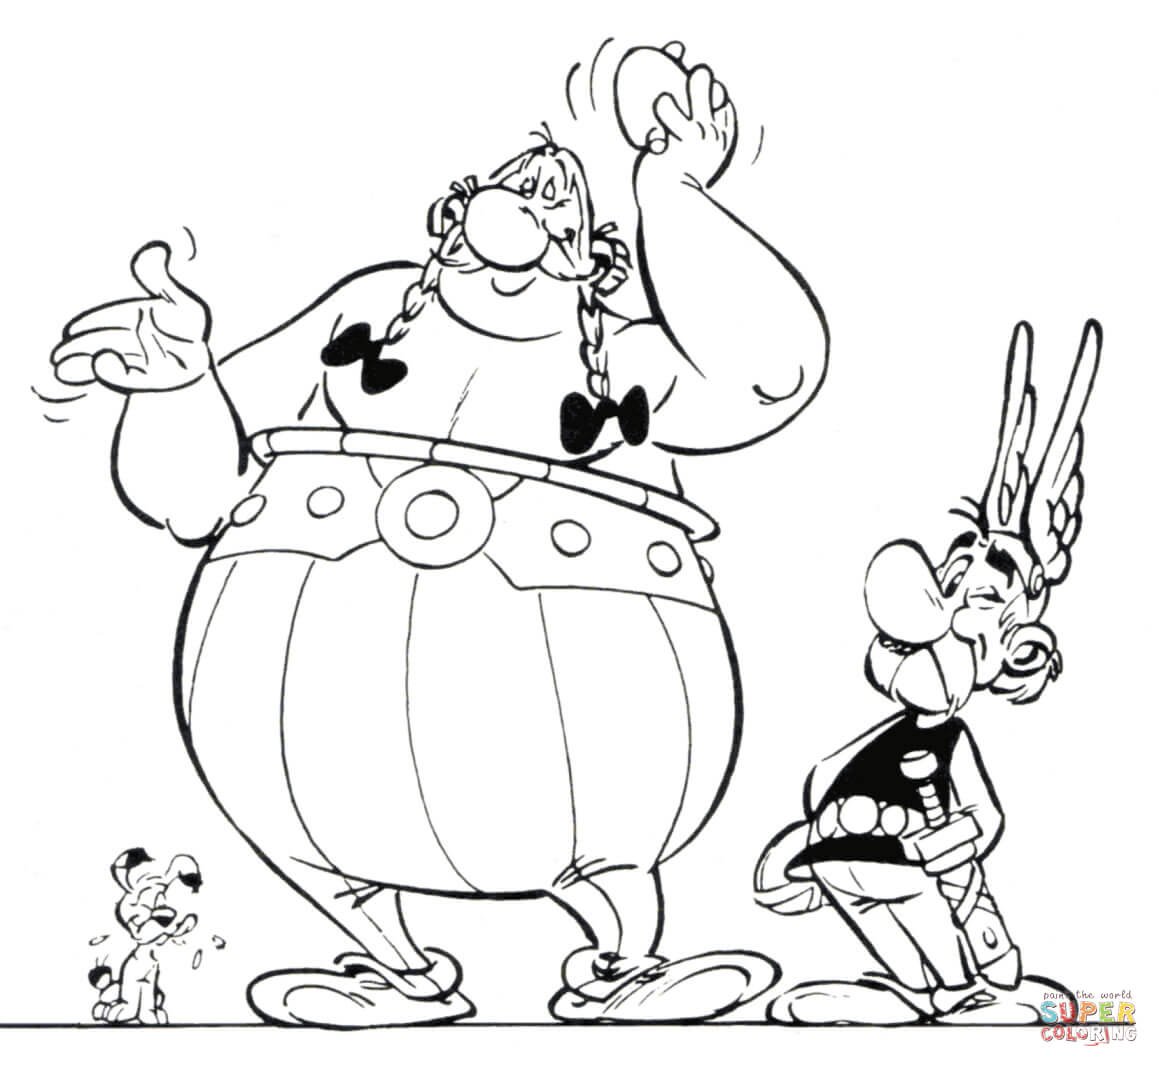 Asterix and Obelix coloring page